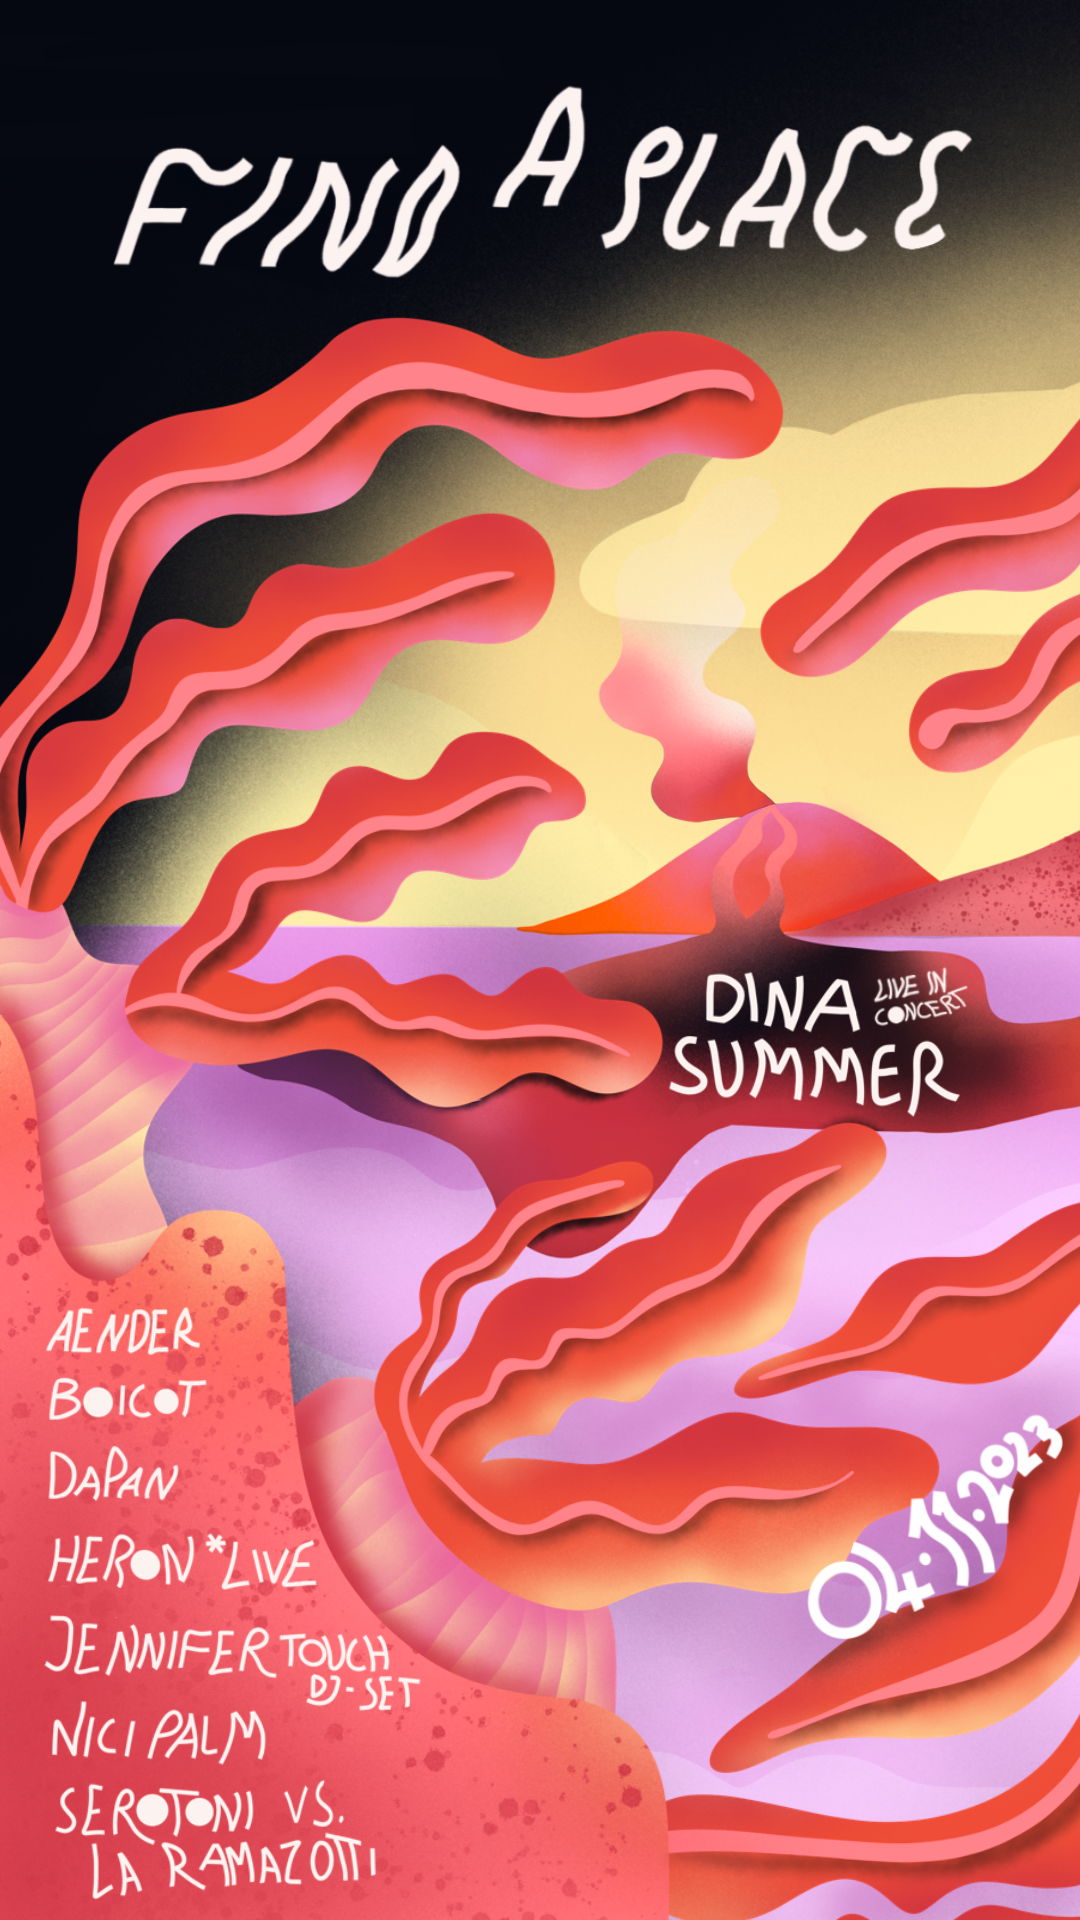 Find a Place with Dina Summer - Página frontal